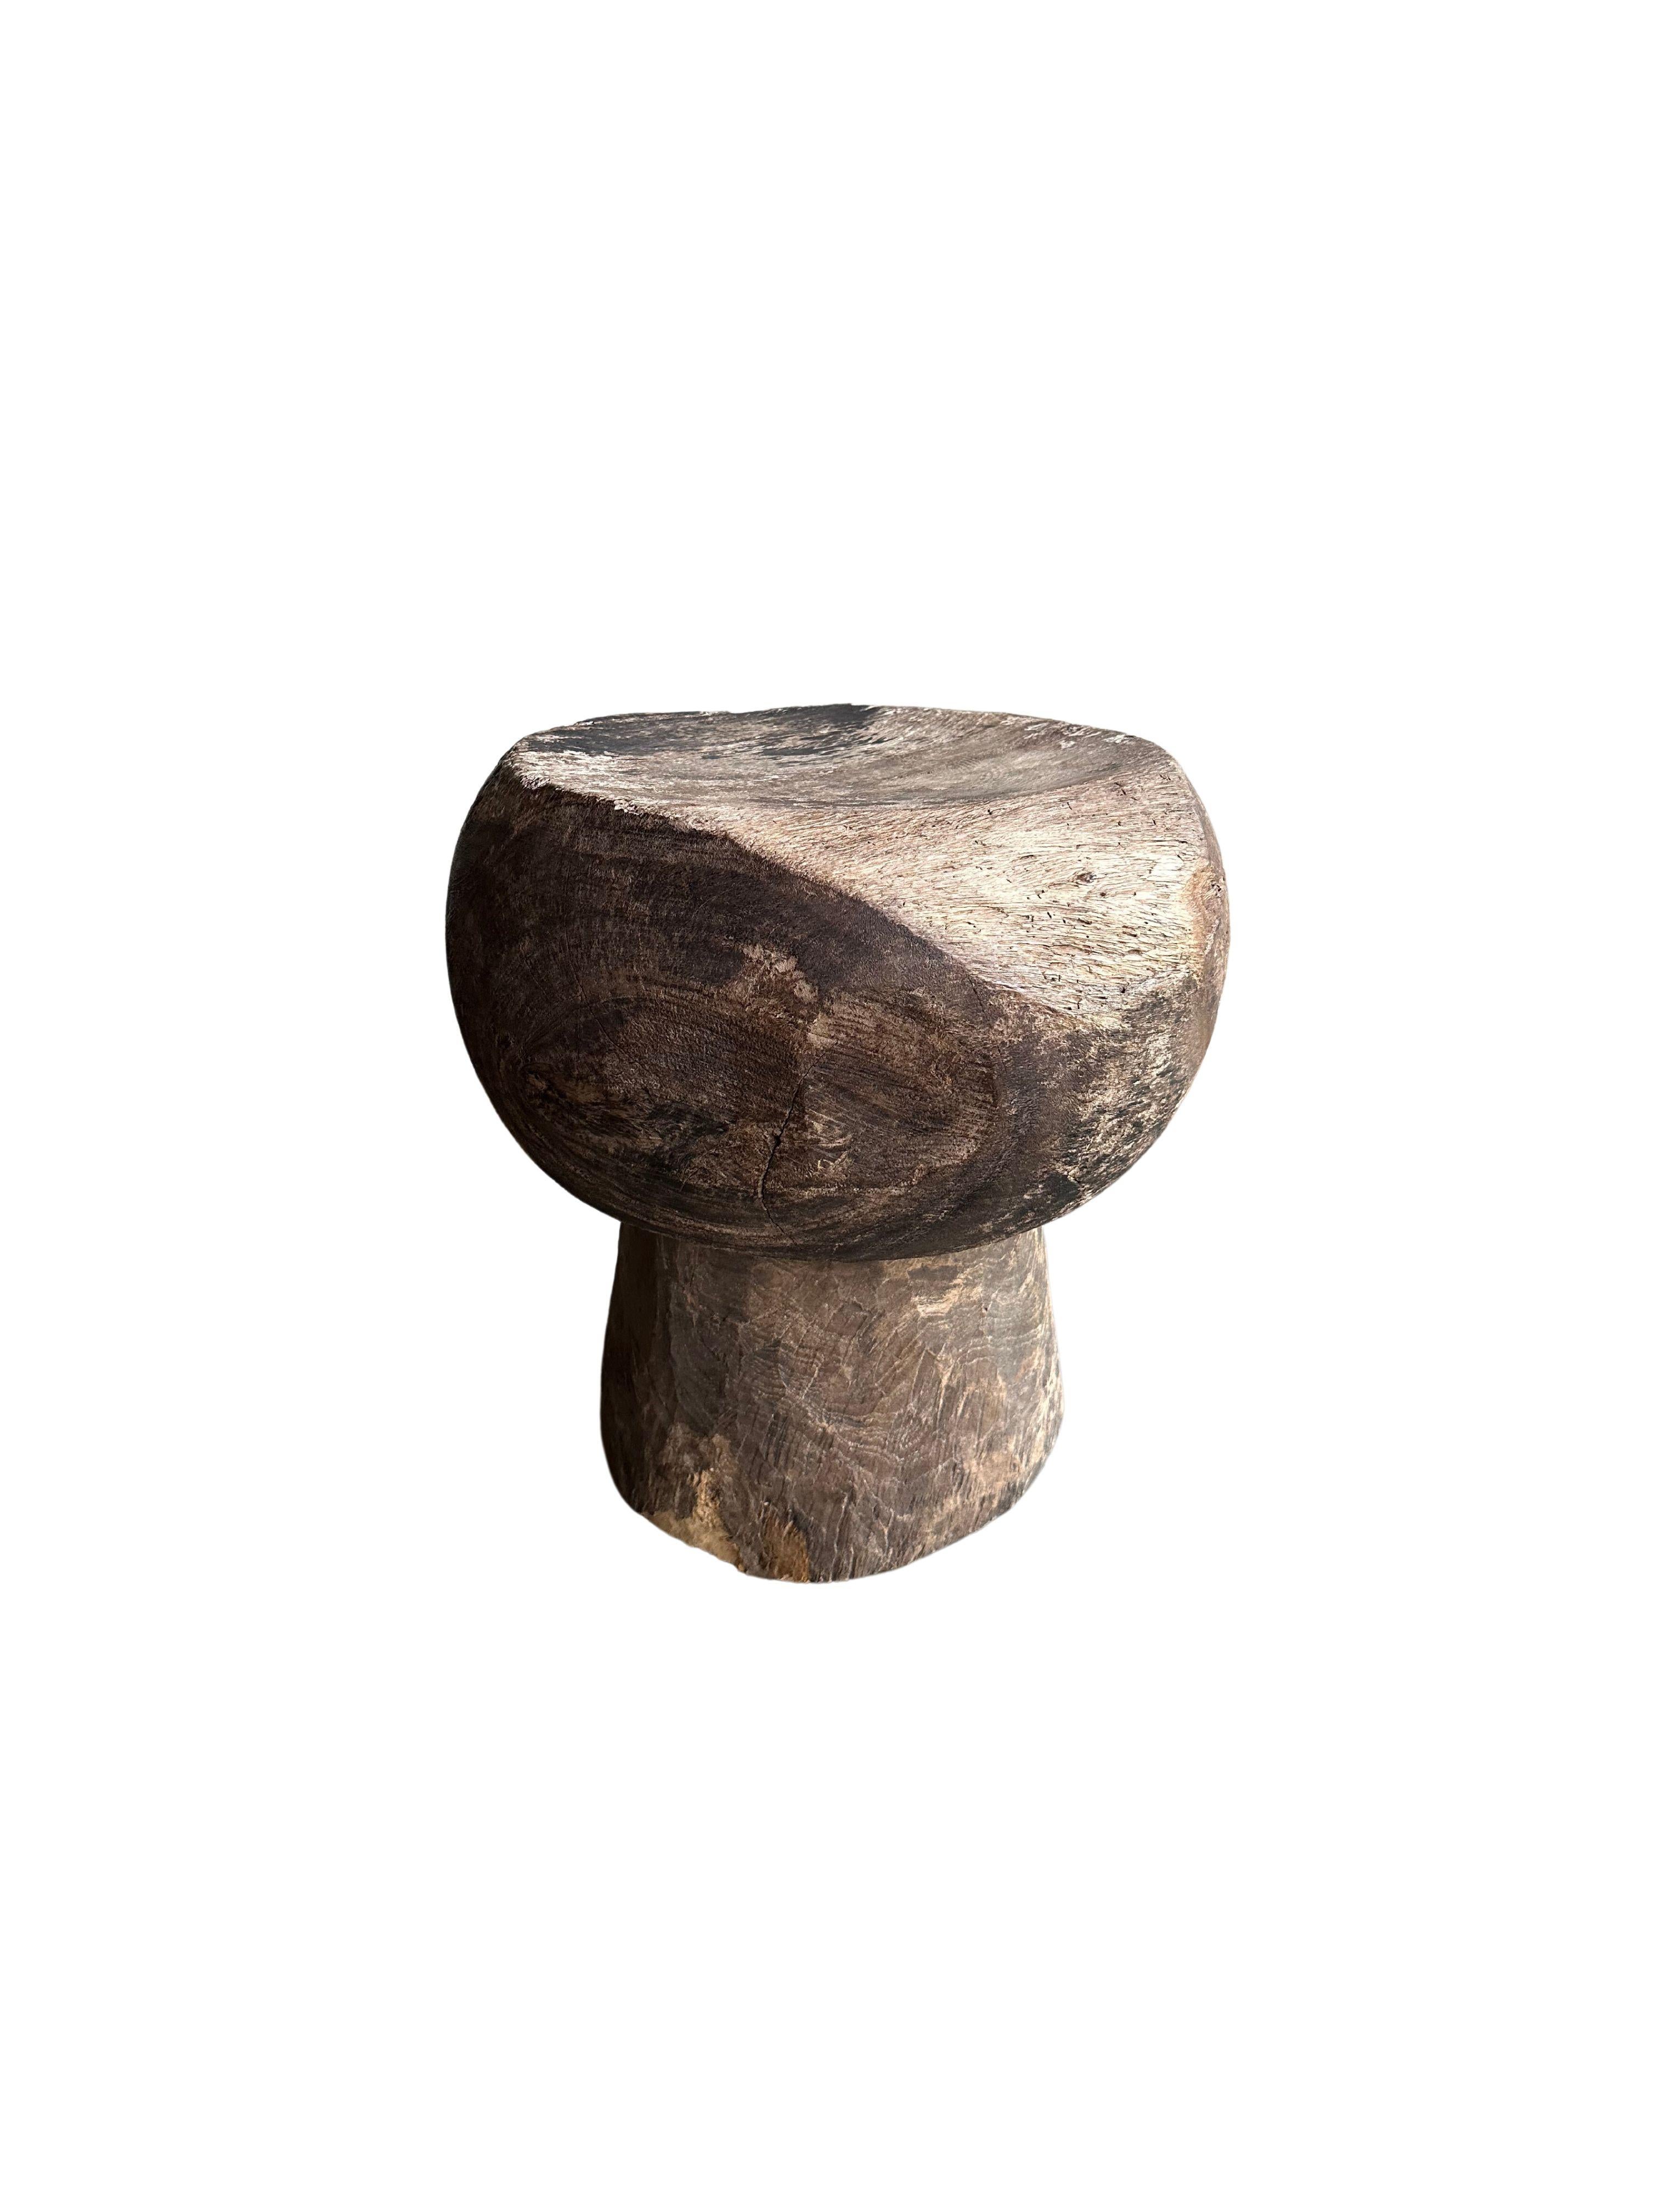 Indonesian Suar Wood Stool From Java, Modern Organic For Sale